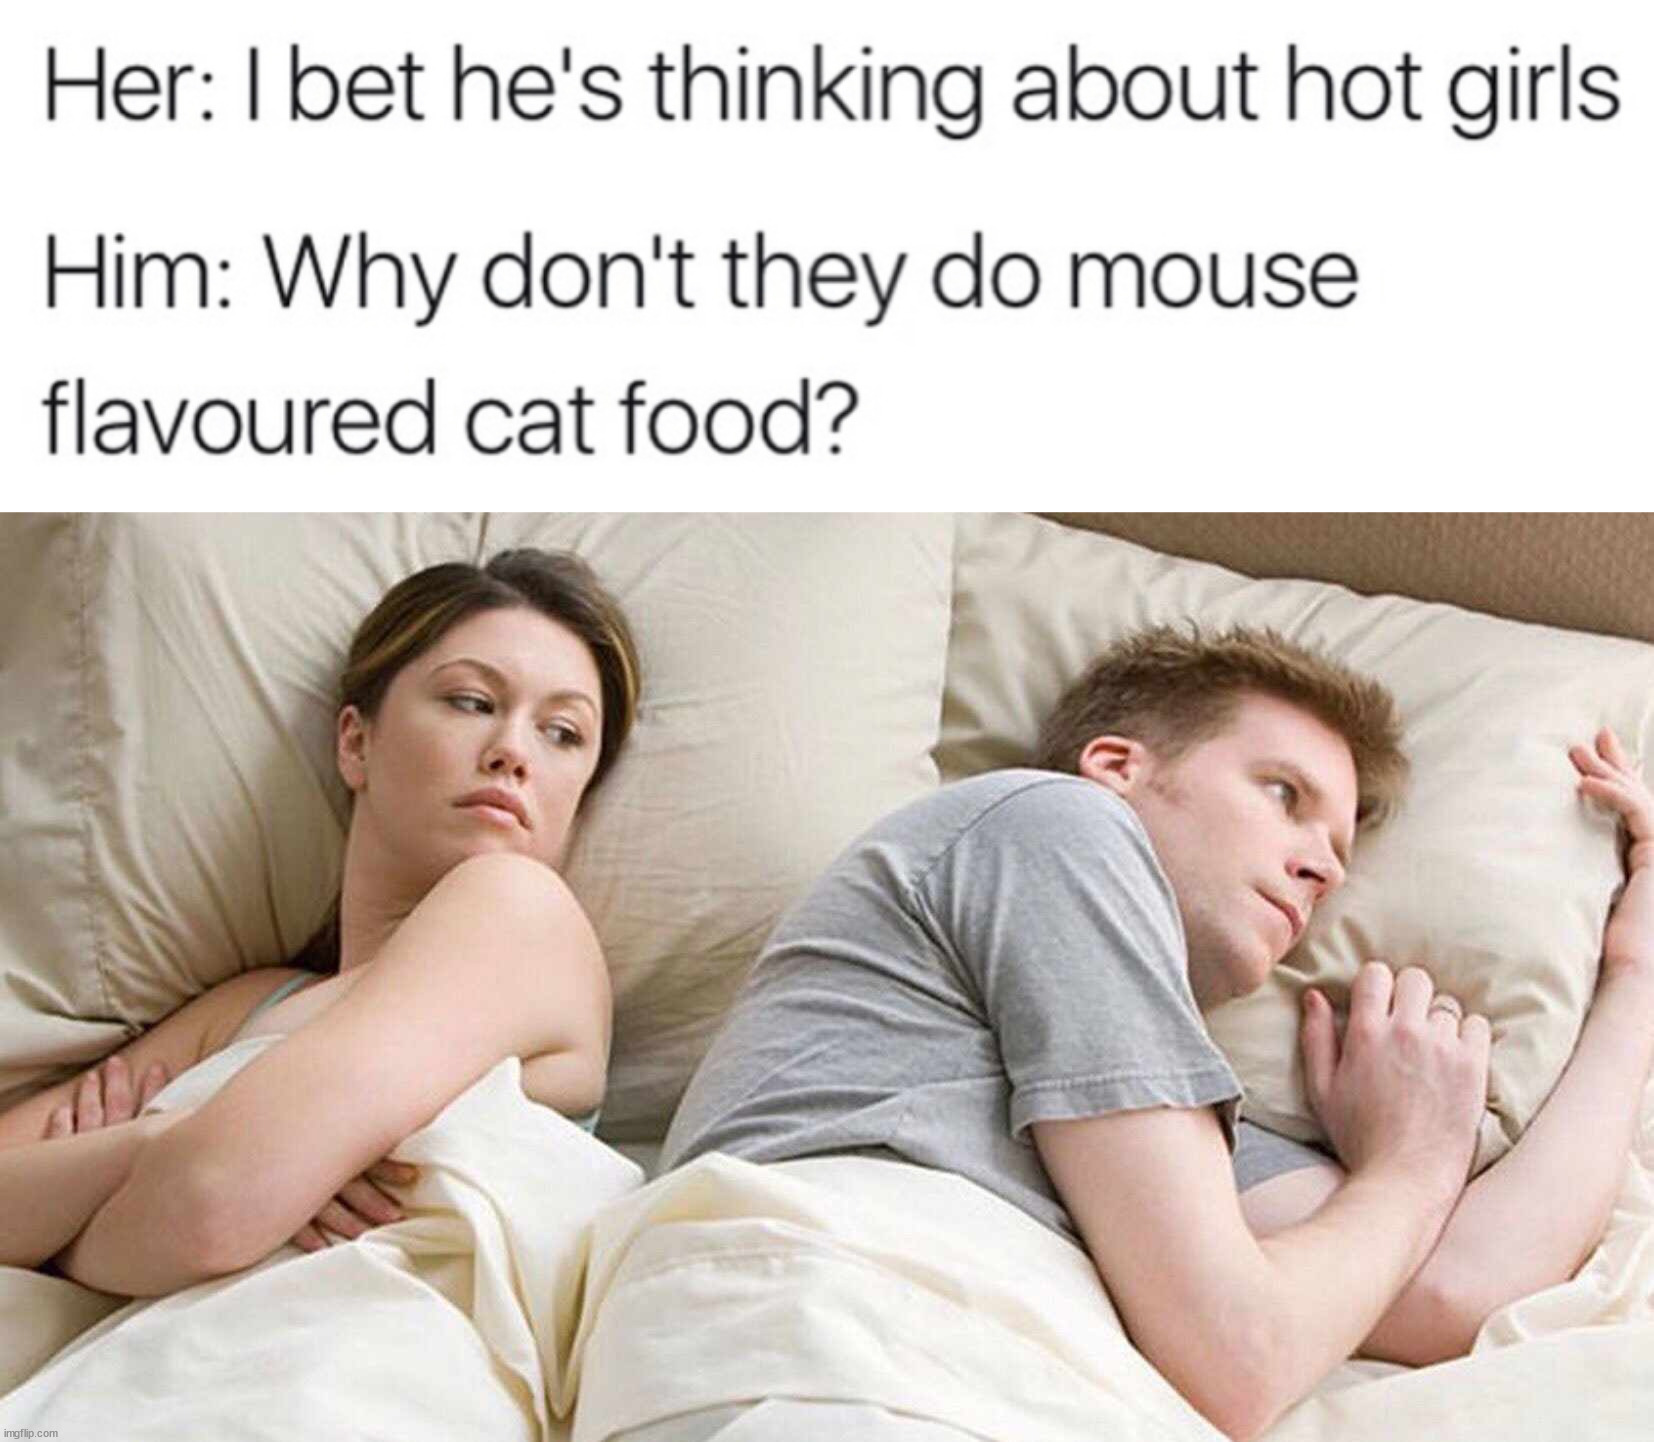 Great questions | image tagged in memes,i bet he's thinking about other women,questions | made w/ Imgflip meme maker